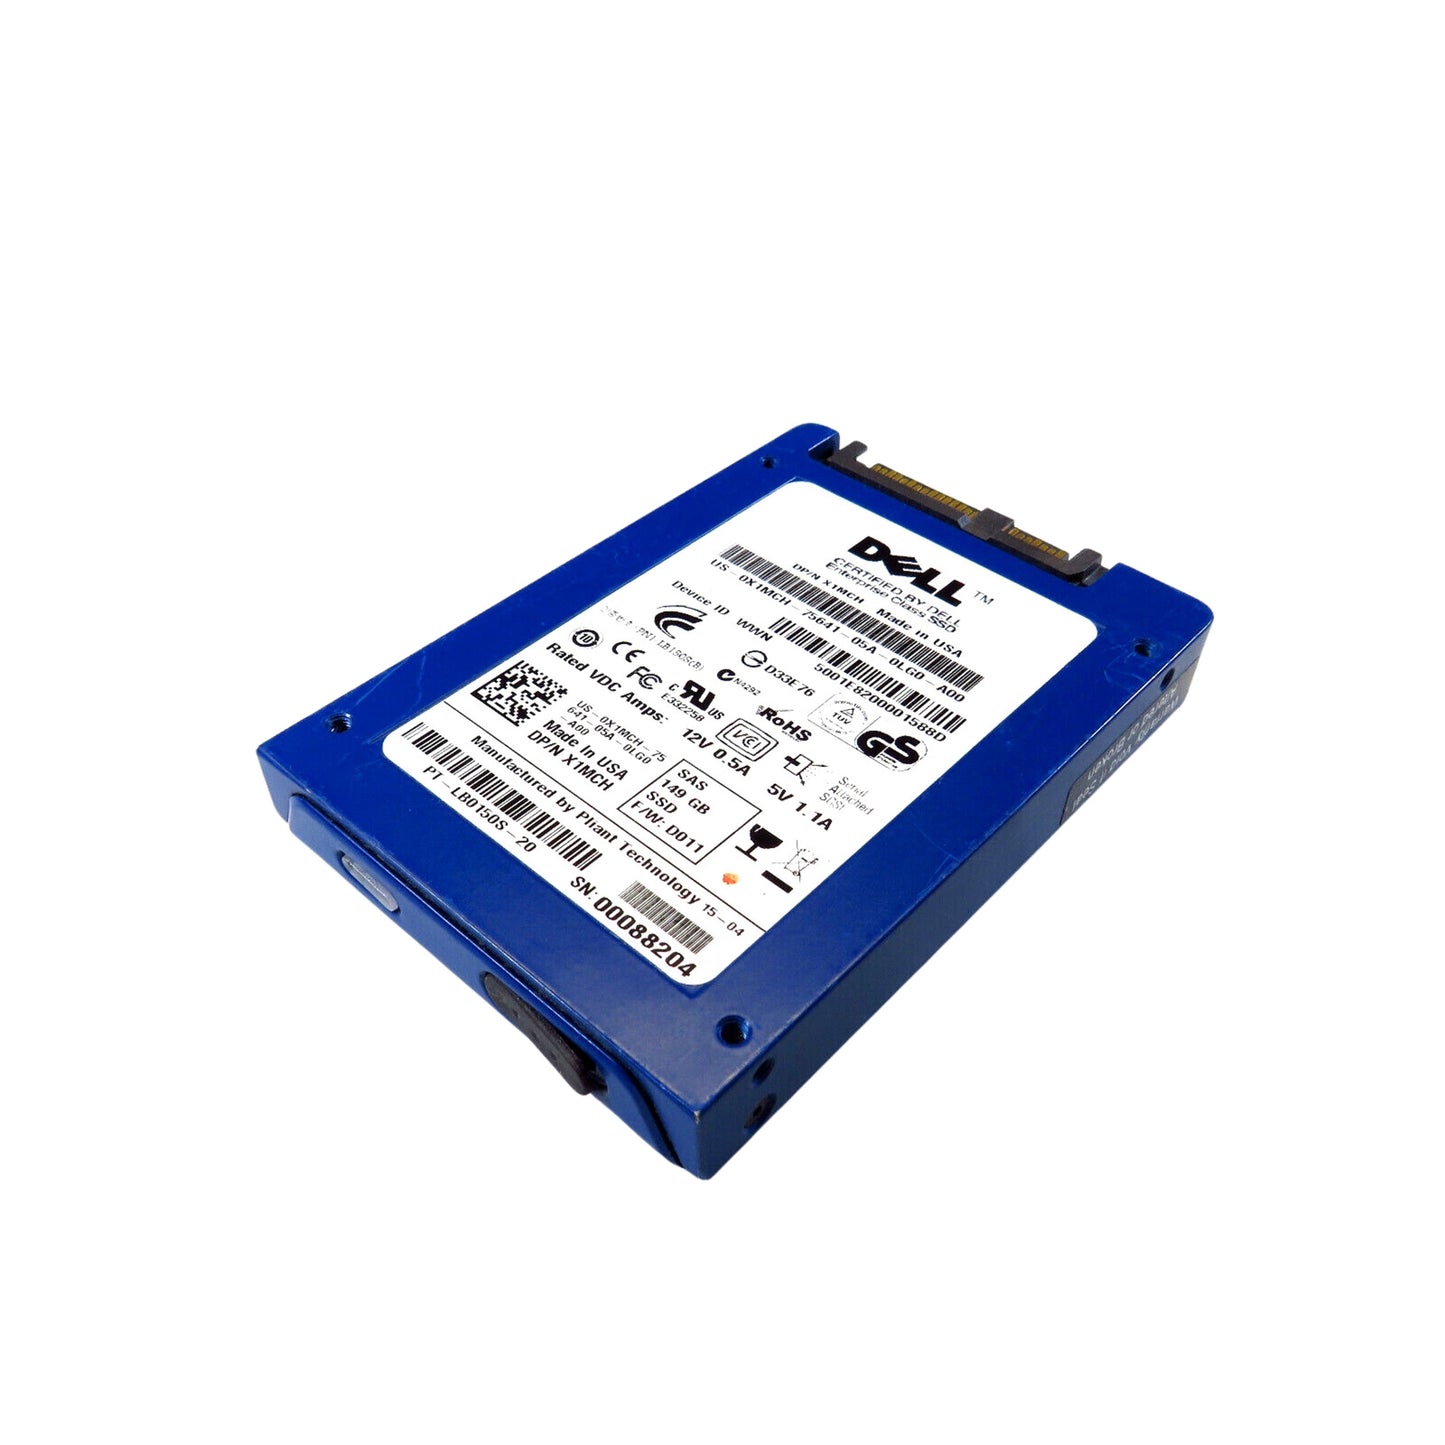 Dell X1MCH 149GB 2.5" SAS 3Gbps Enterprise SSD Solid State Drive (Refurbished)